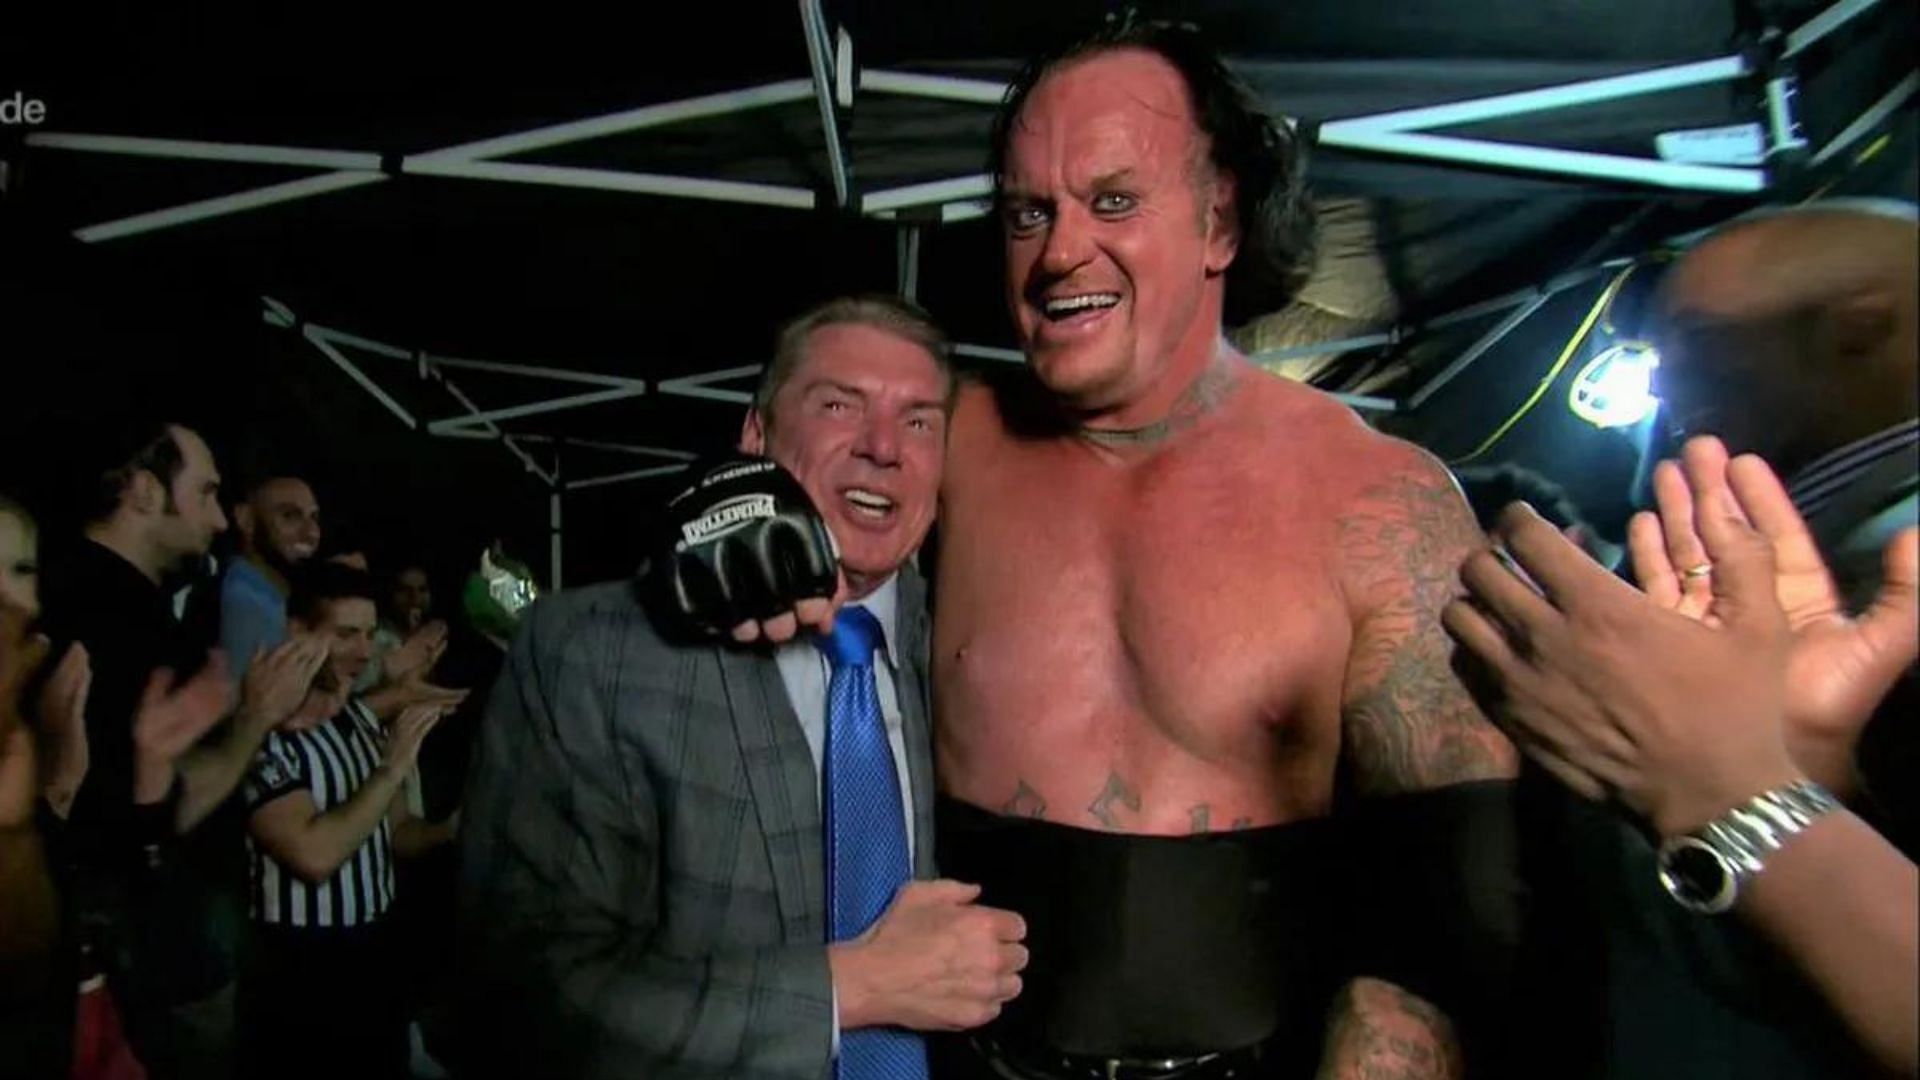 WWE personalities, The Undertaker and Vince McMahon